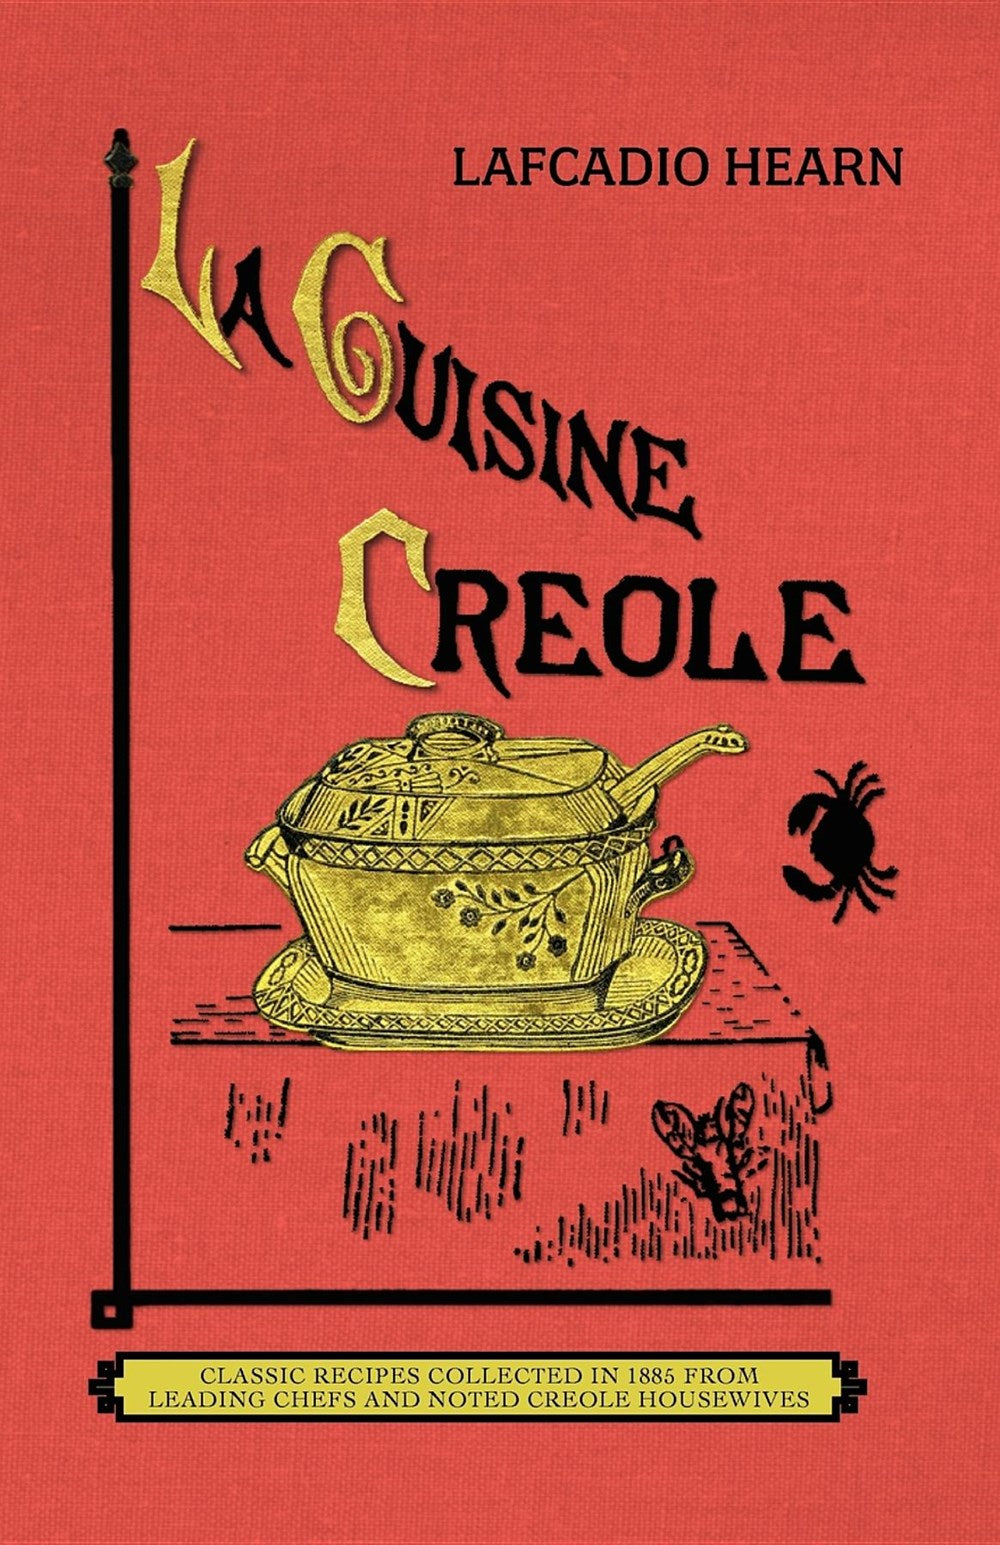 La Cuisine Creole: A Collection of Culinary Recipes from Leading Chefs and Noted Creole Housewives, Who Have Made New Orleans Famous for Its Cuisine.